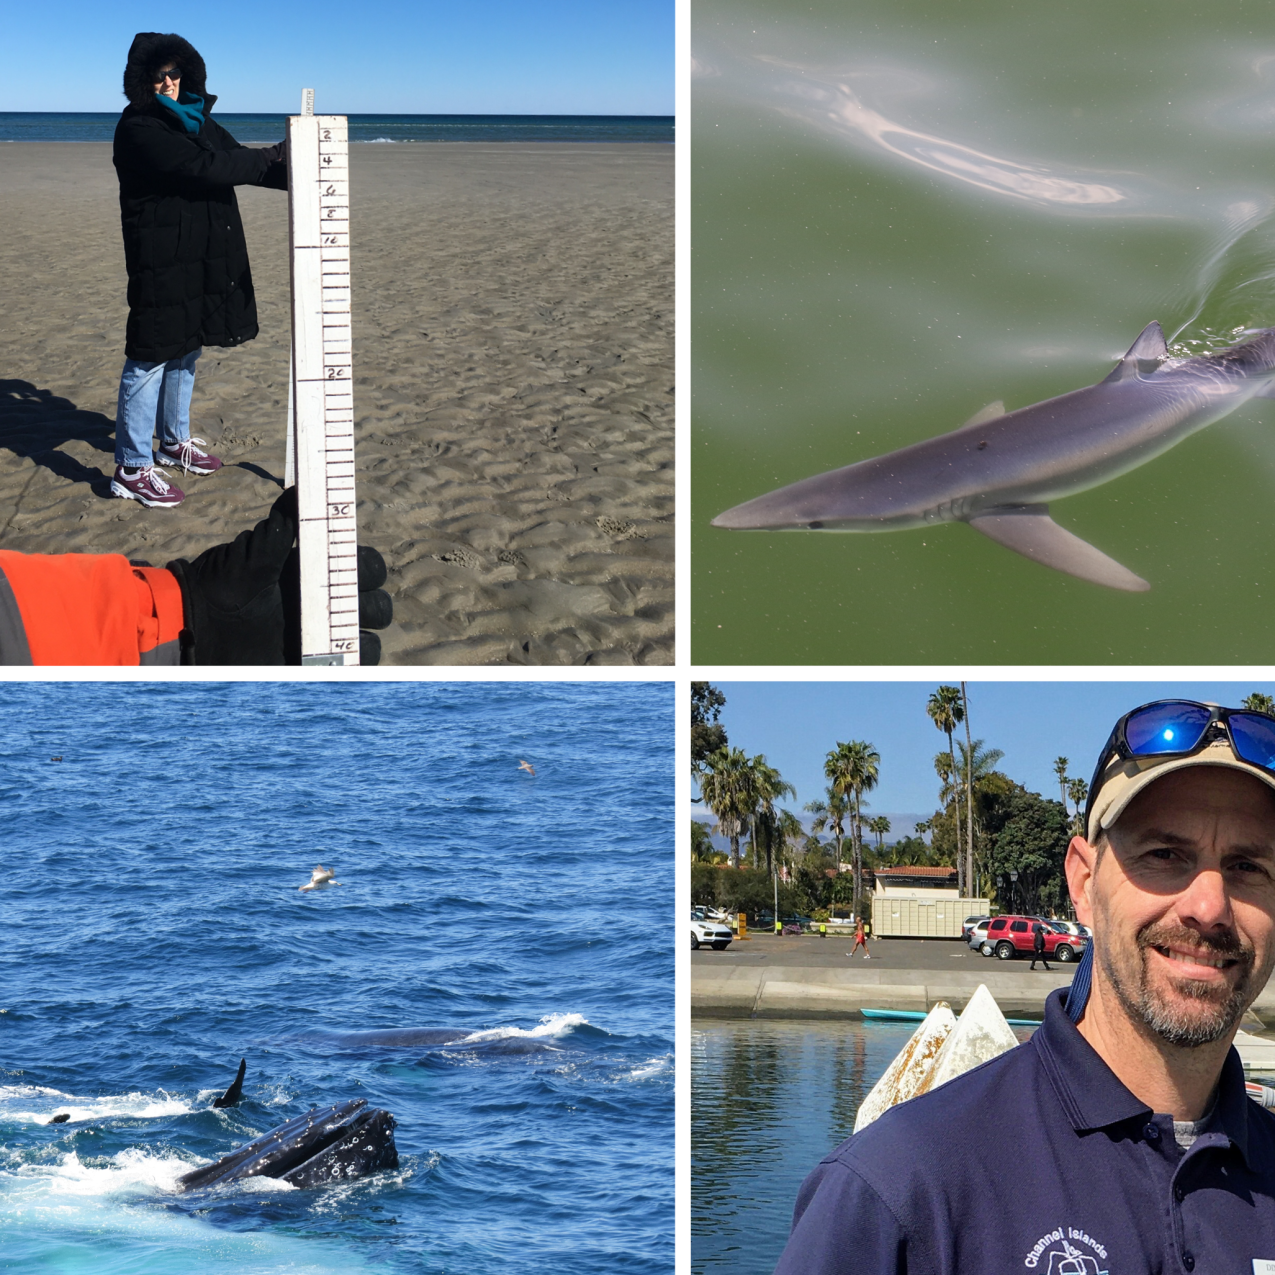 A grid of six photos. Top row, left to right: Two people stand on a beach, a shark swimming through the water, and two people sitting in front of a microscope. Bottom row, left to right: Whales surface to feed, a person smiling at the camera, and a sea bird starting its flight from the water.